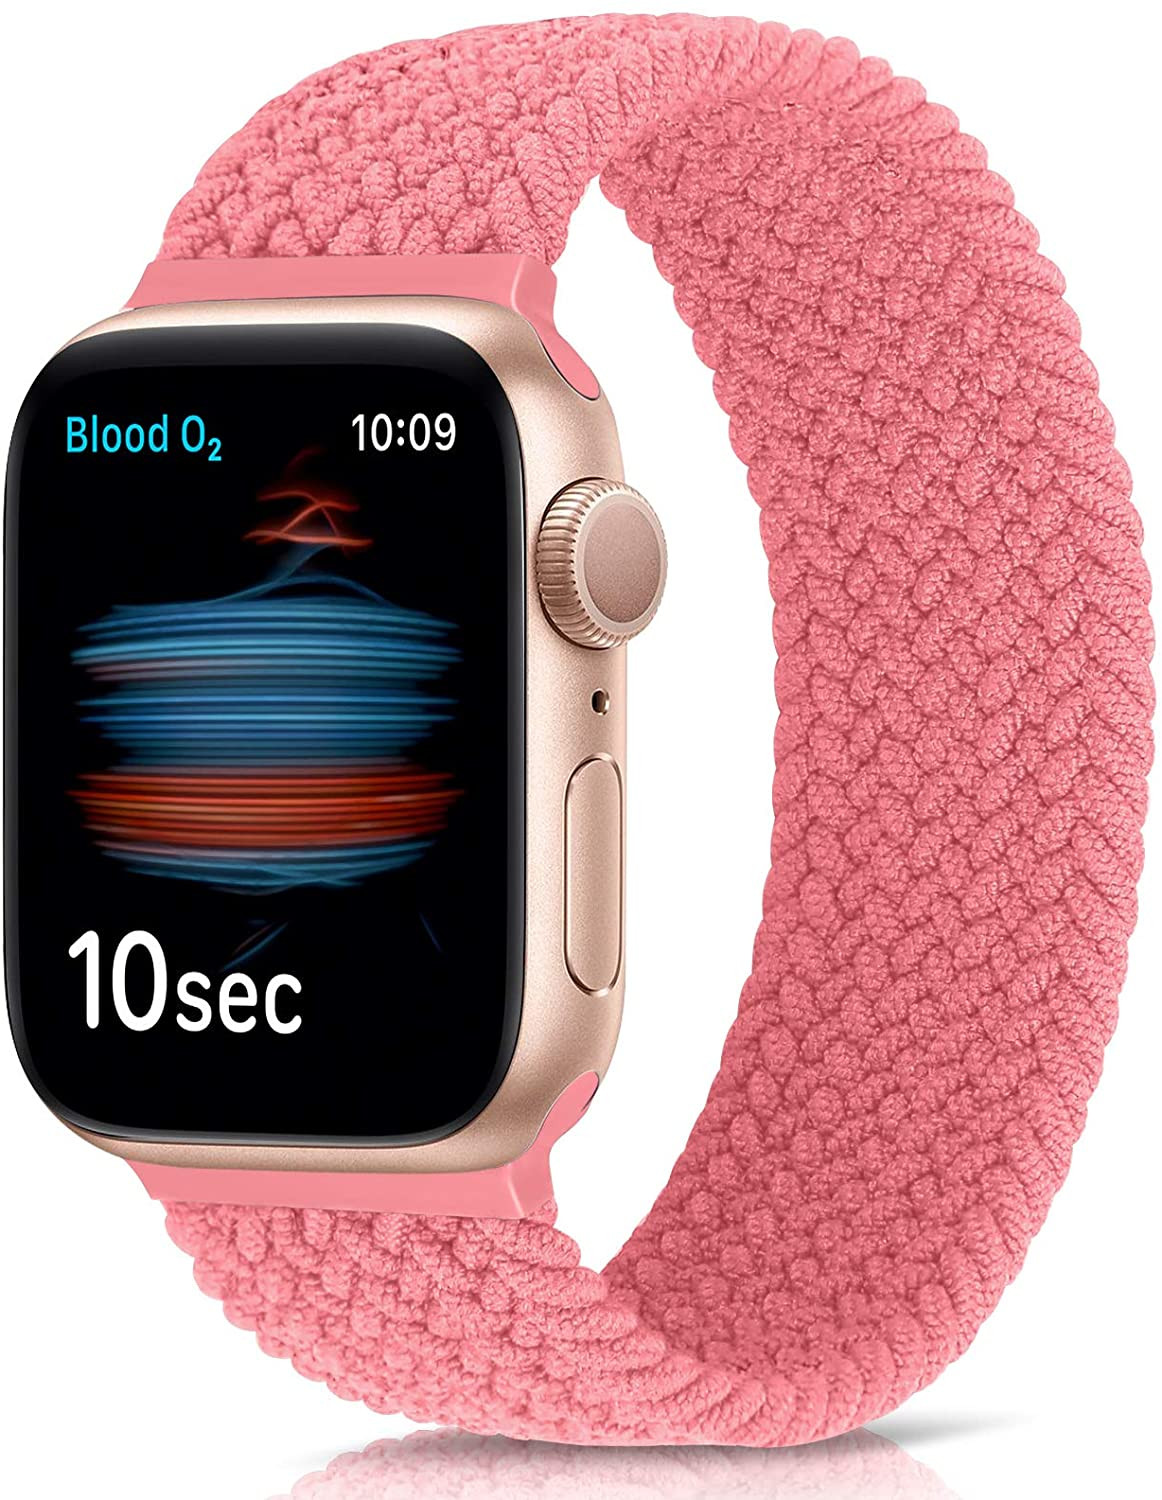 Maui Braided Loop Apple Watch Band - Star Unity / Rose Gold - The